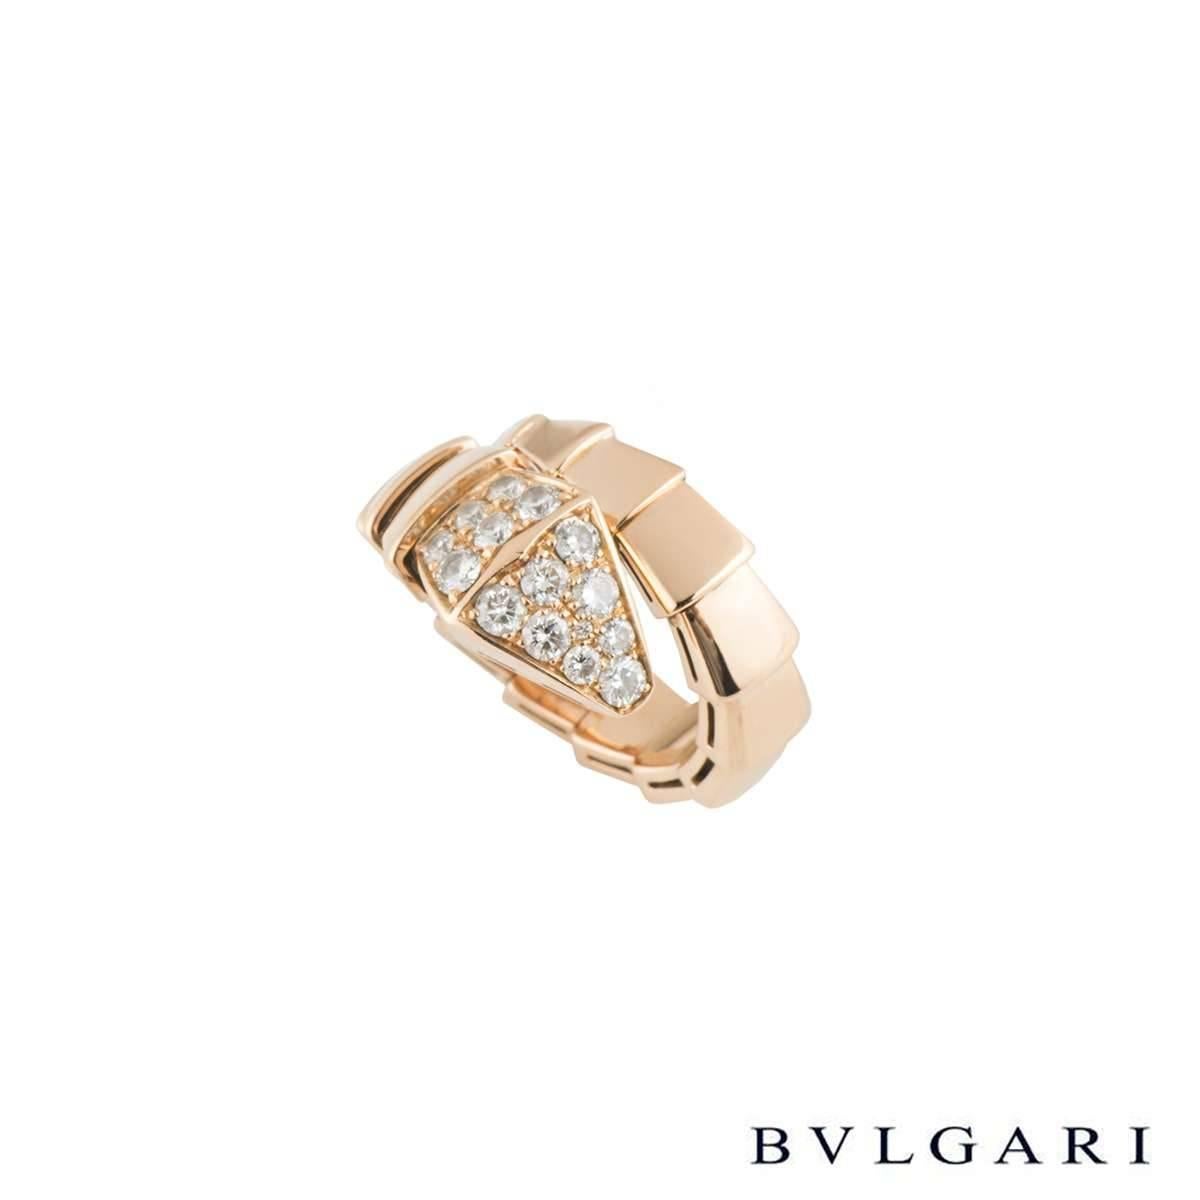 A luxurious 18k rose gold Bvlgari diamond ring from the Serpenti collection. The ring is in the form of a serpent wrapping around the finger, comprising 15 graduating flexible intersections including the diamond set head of a snake. The head has 15